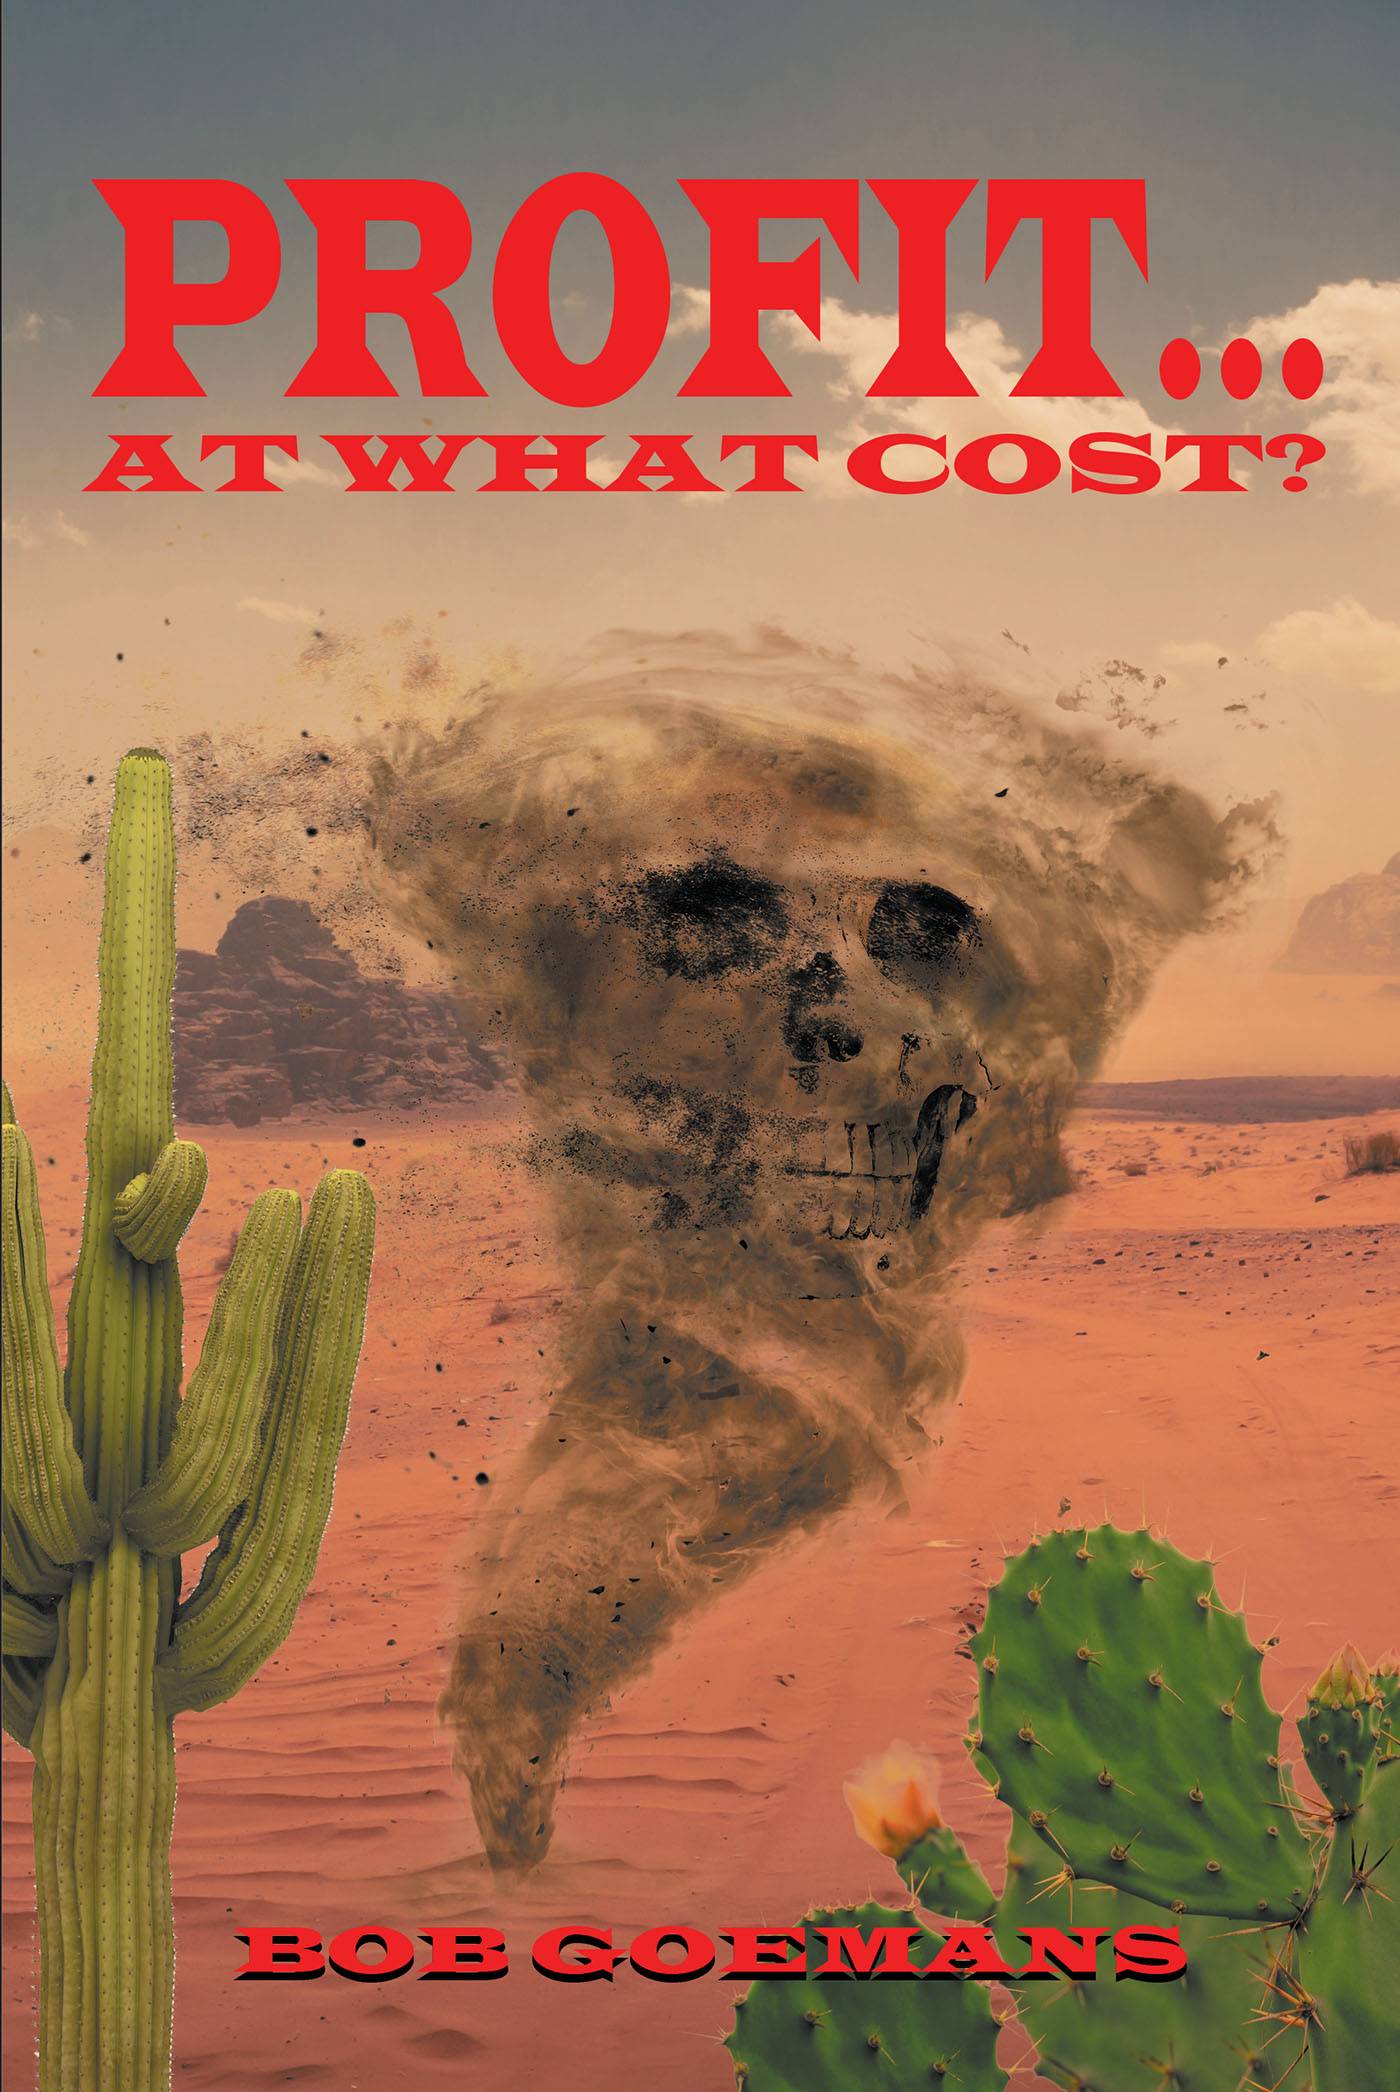 Profit... At What Cost? Cover Image